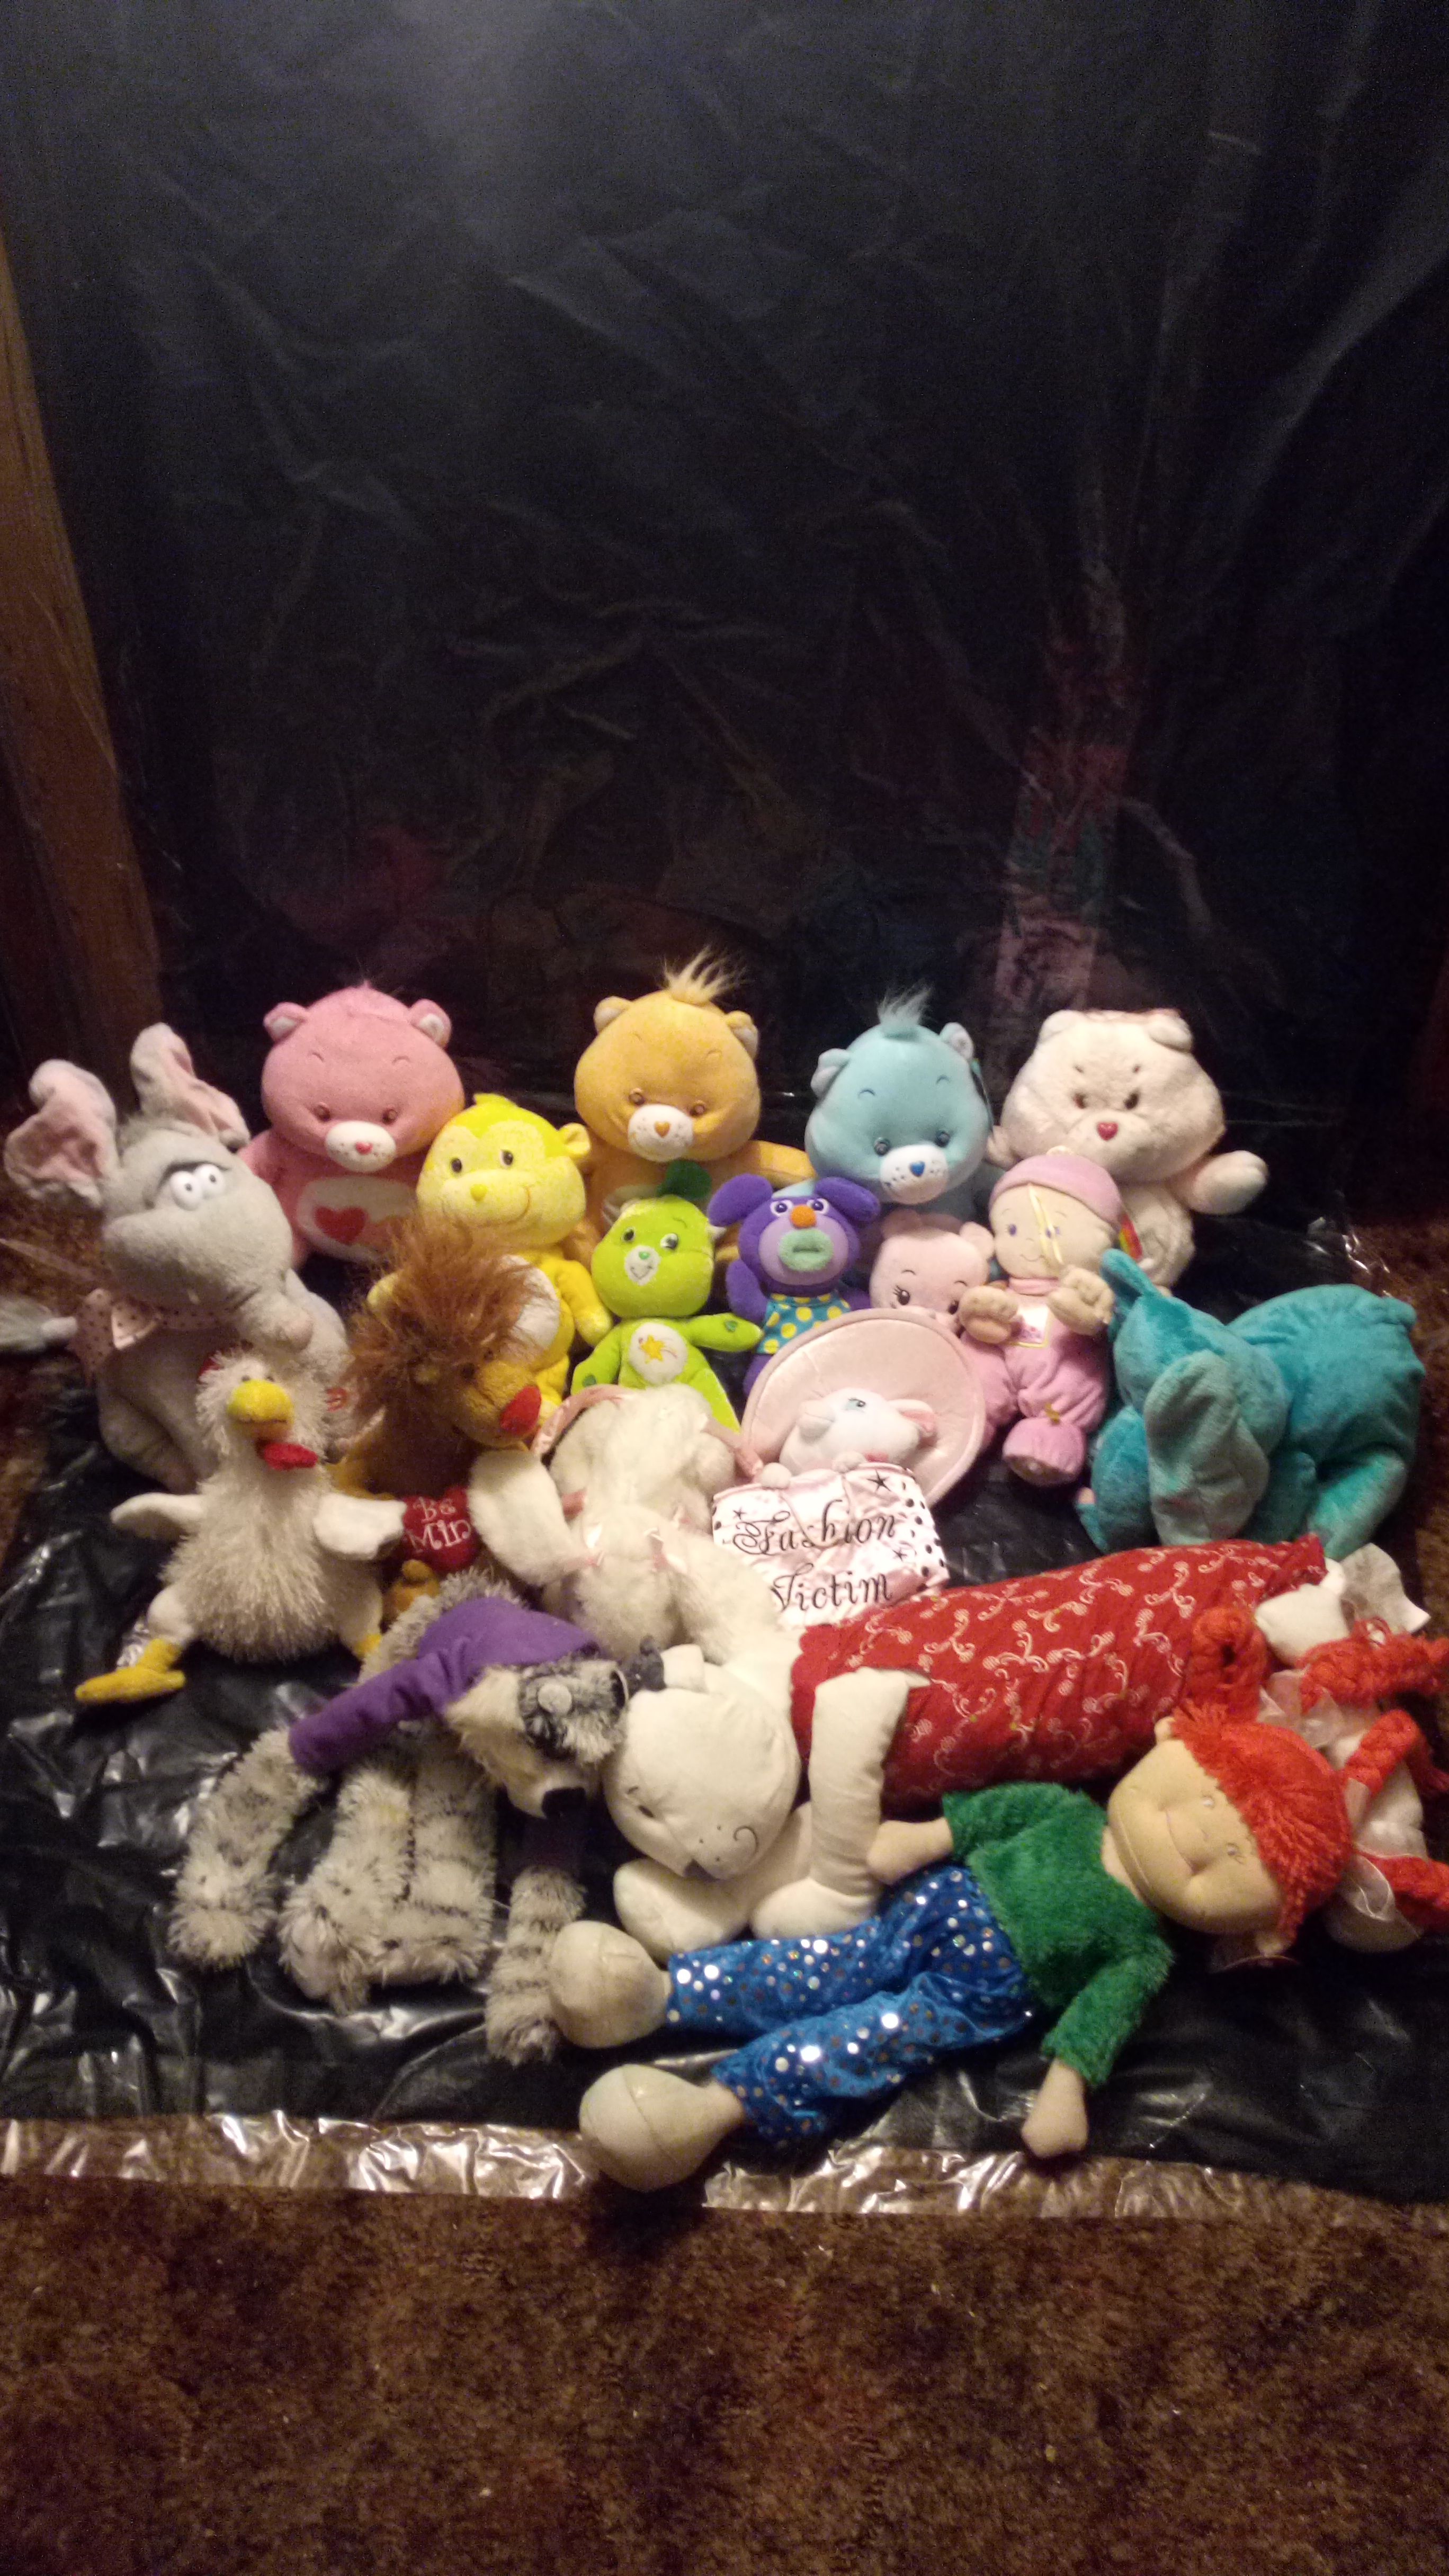 Care bear and other stuffed animals